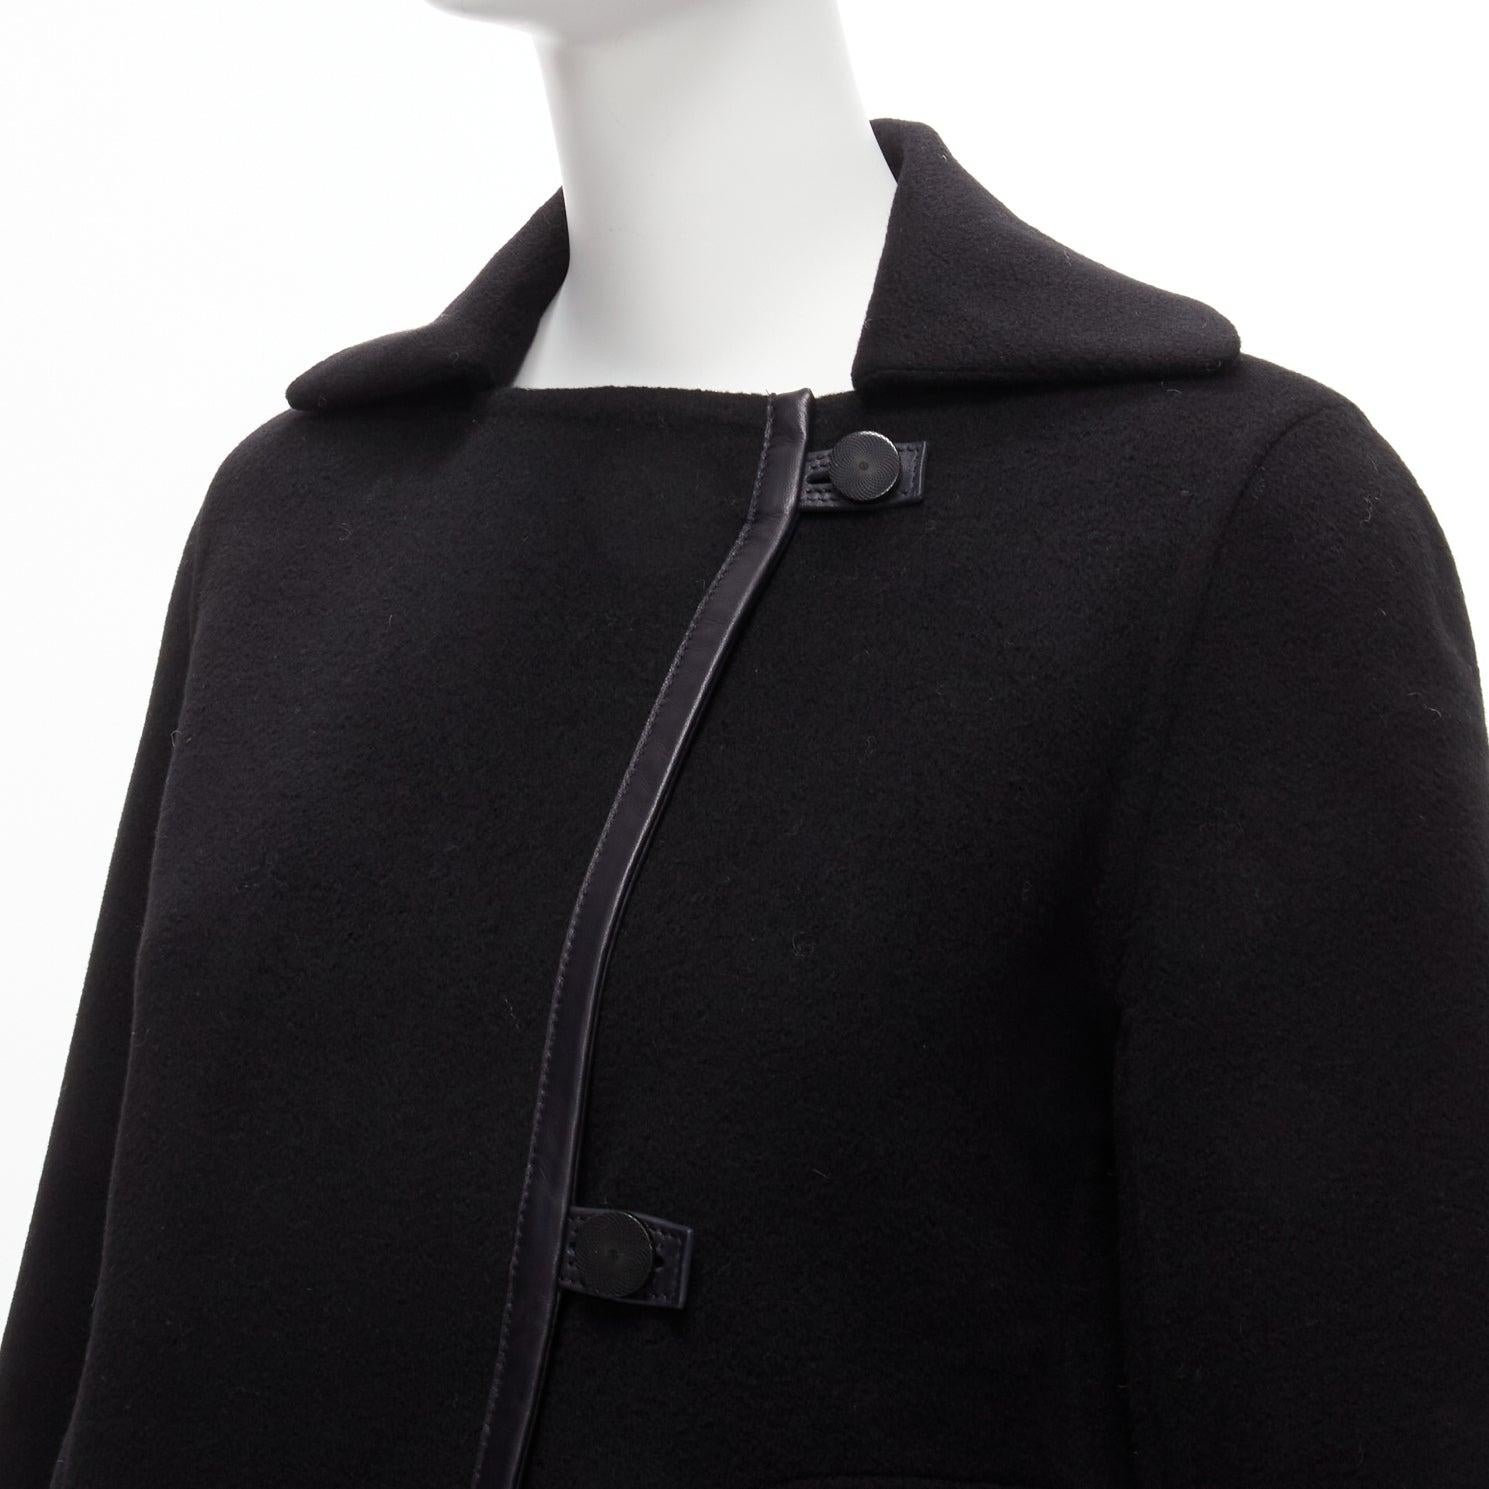 new HERMES Jean Paul Gaultier black cashmere leather trimmed H buttons jacket FR34 XS
Reference: SNKO/A00260
Brand: Hermes
Designer: Jean Paul Gaultier
Material: Cashmere, Leather
Color: Black
Pattern: Solid
Closure: Button
Lining: Black